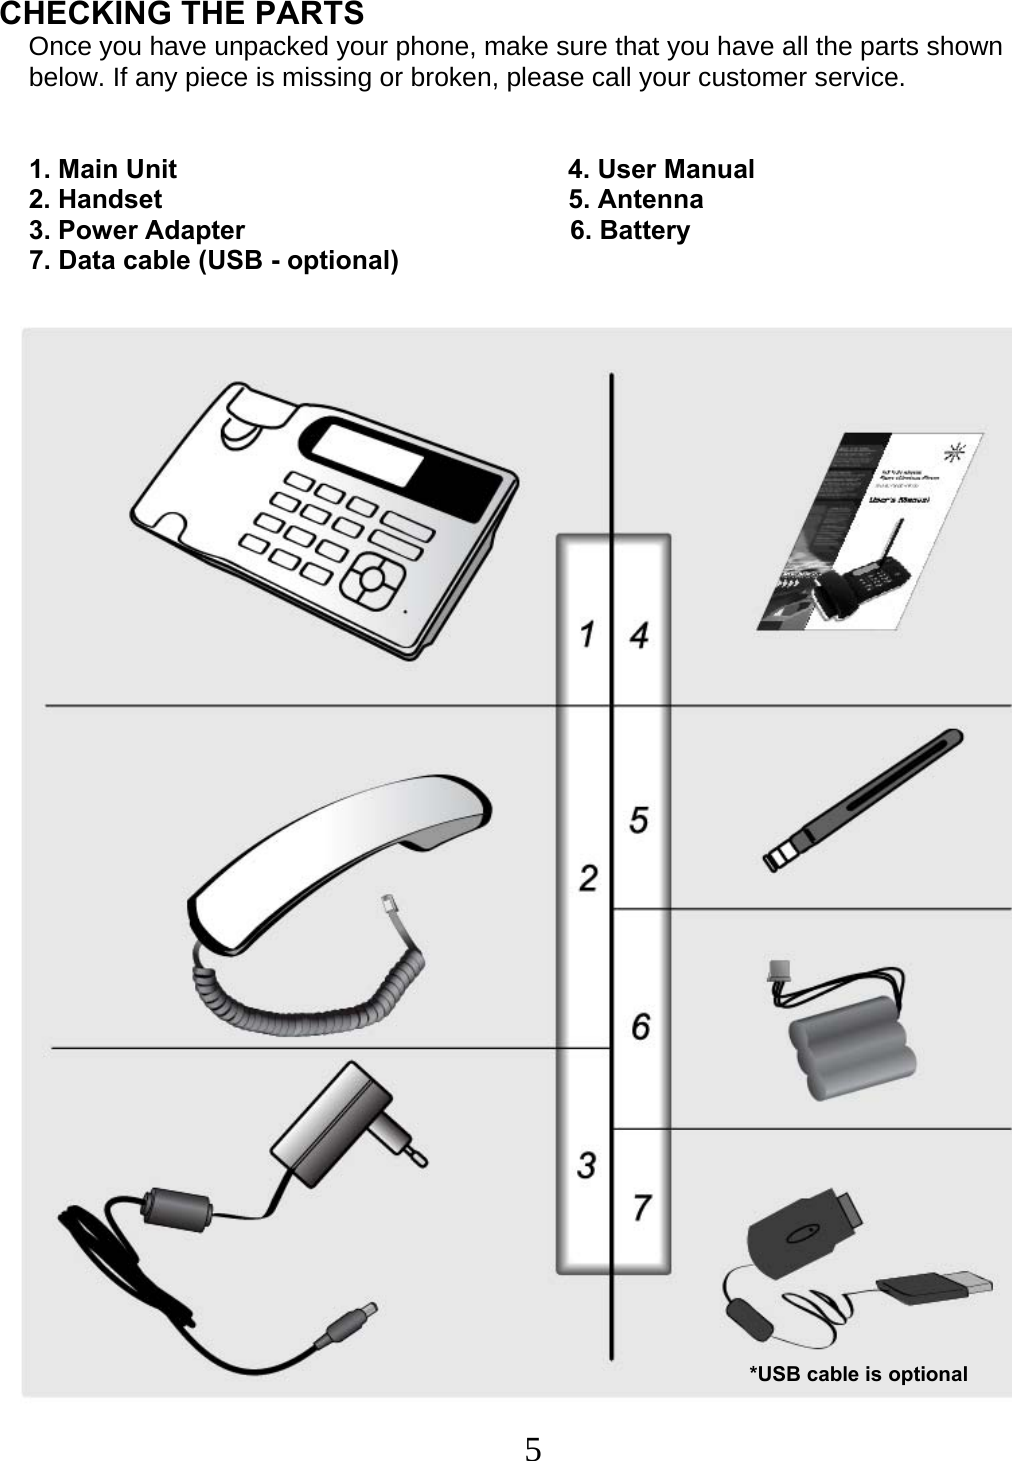  5   CHECKING THE PARTS      Once you have unpacked your phone, make sure that you have all the parts shown      below. If any piece is missing or broken, please call your customer service.        1. Main Unit                                                     4. User Manual     2. Handset                                                       5. Antenna     3. Power Adapter                                            6. Battery     7. Data cable (USB - optional)      *USB cable is optional 